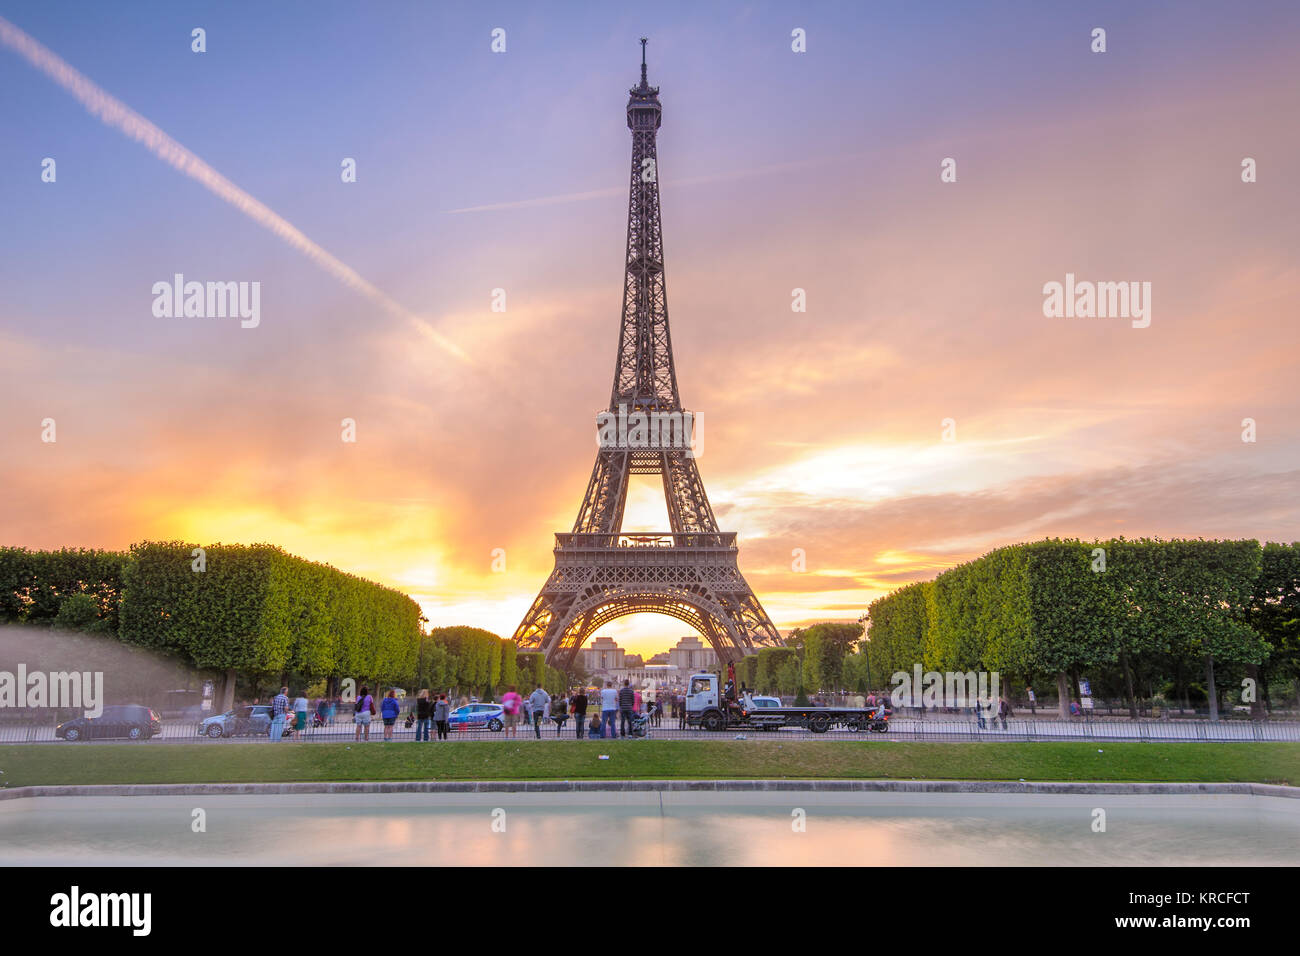 Night view of Eiffel Tower in Paris, France Stock Photo